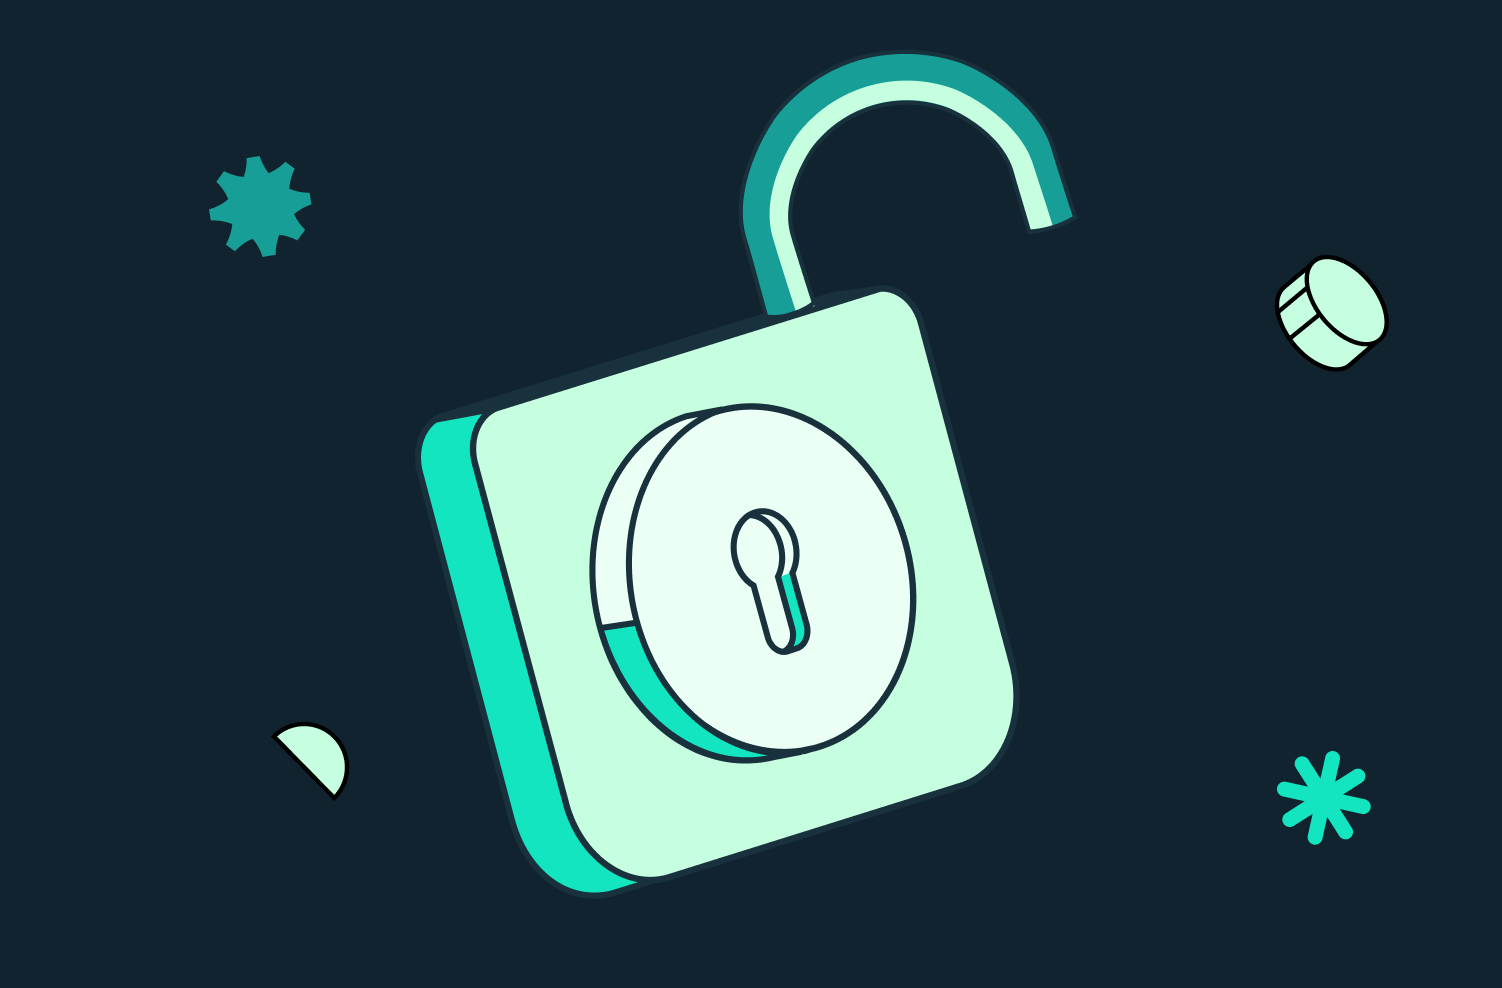 A mint green padlock that has been unlocked, floating on a dark blue background